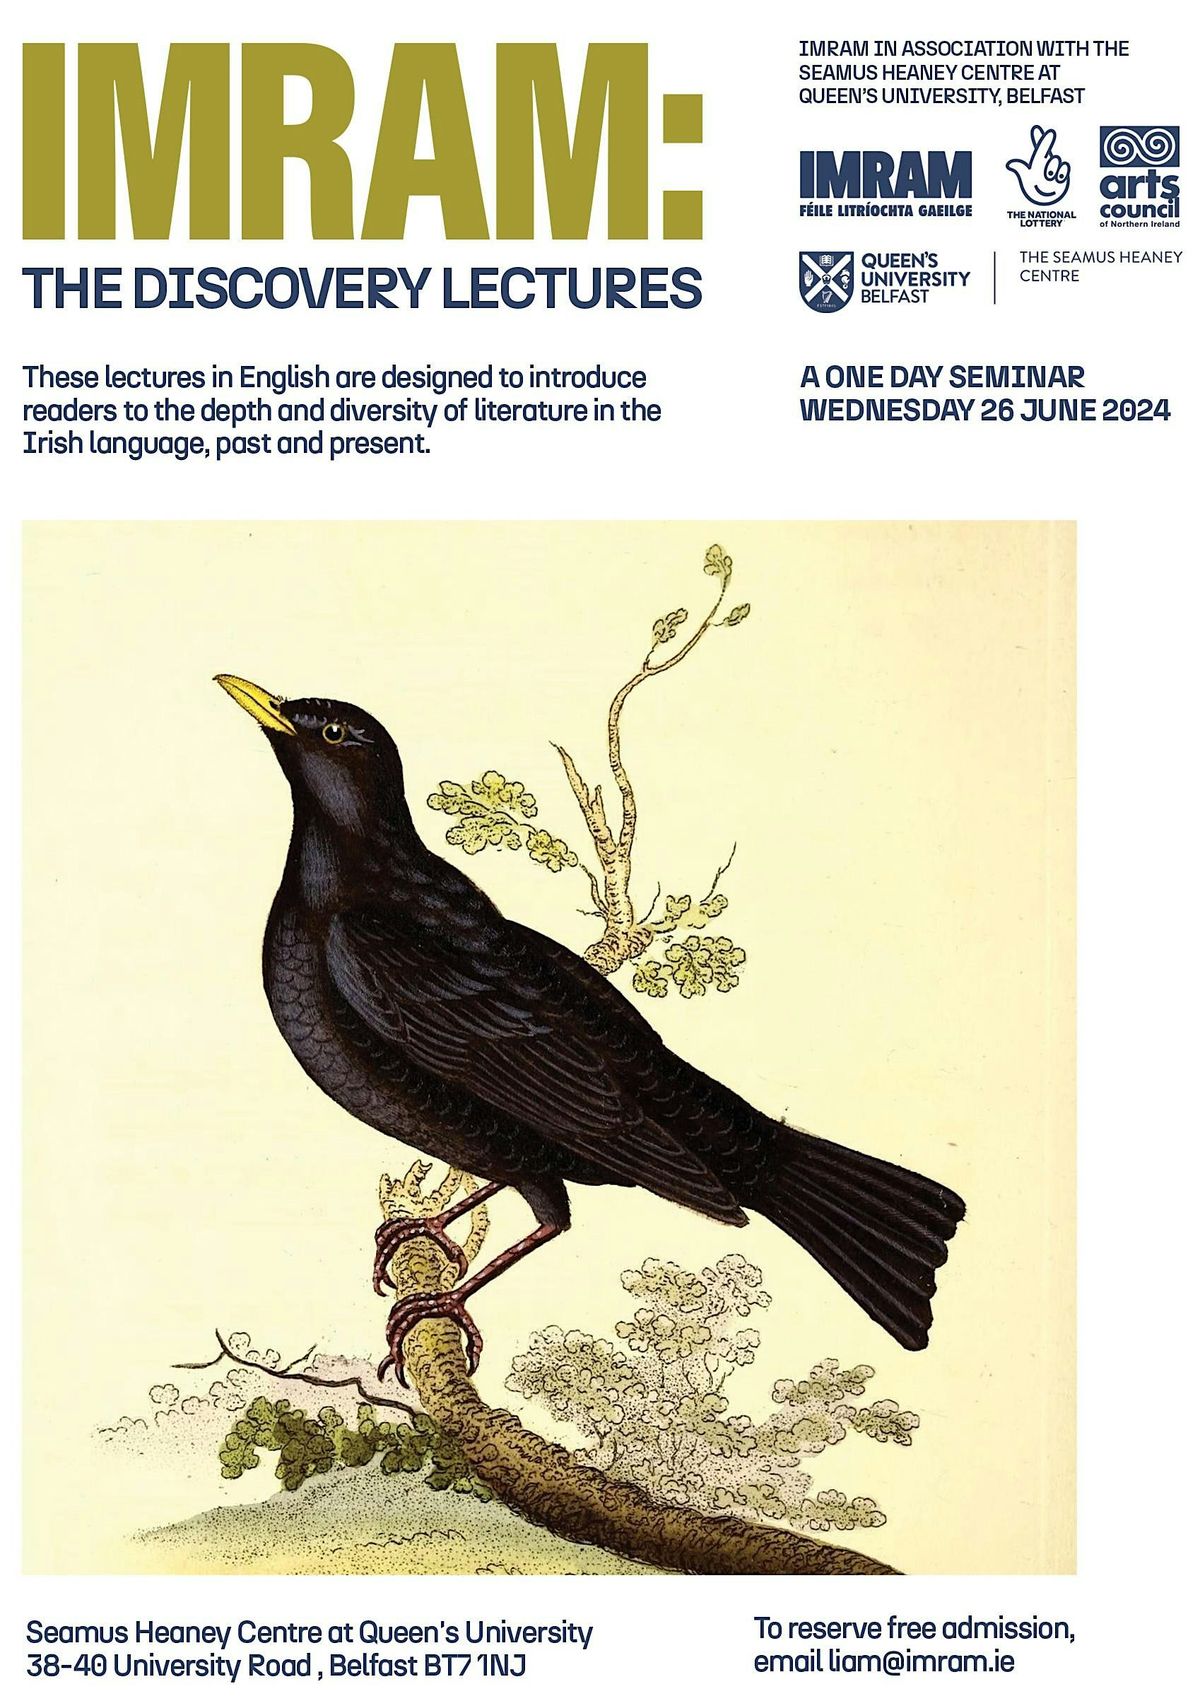 THE DISCOVERY LECTURES